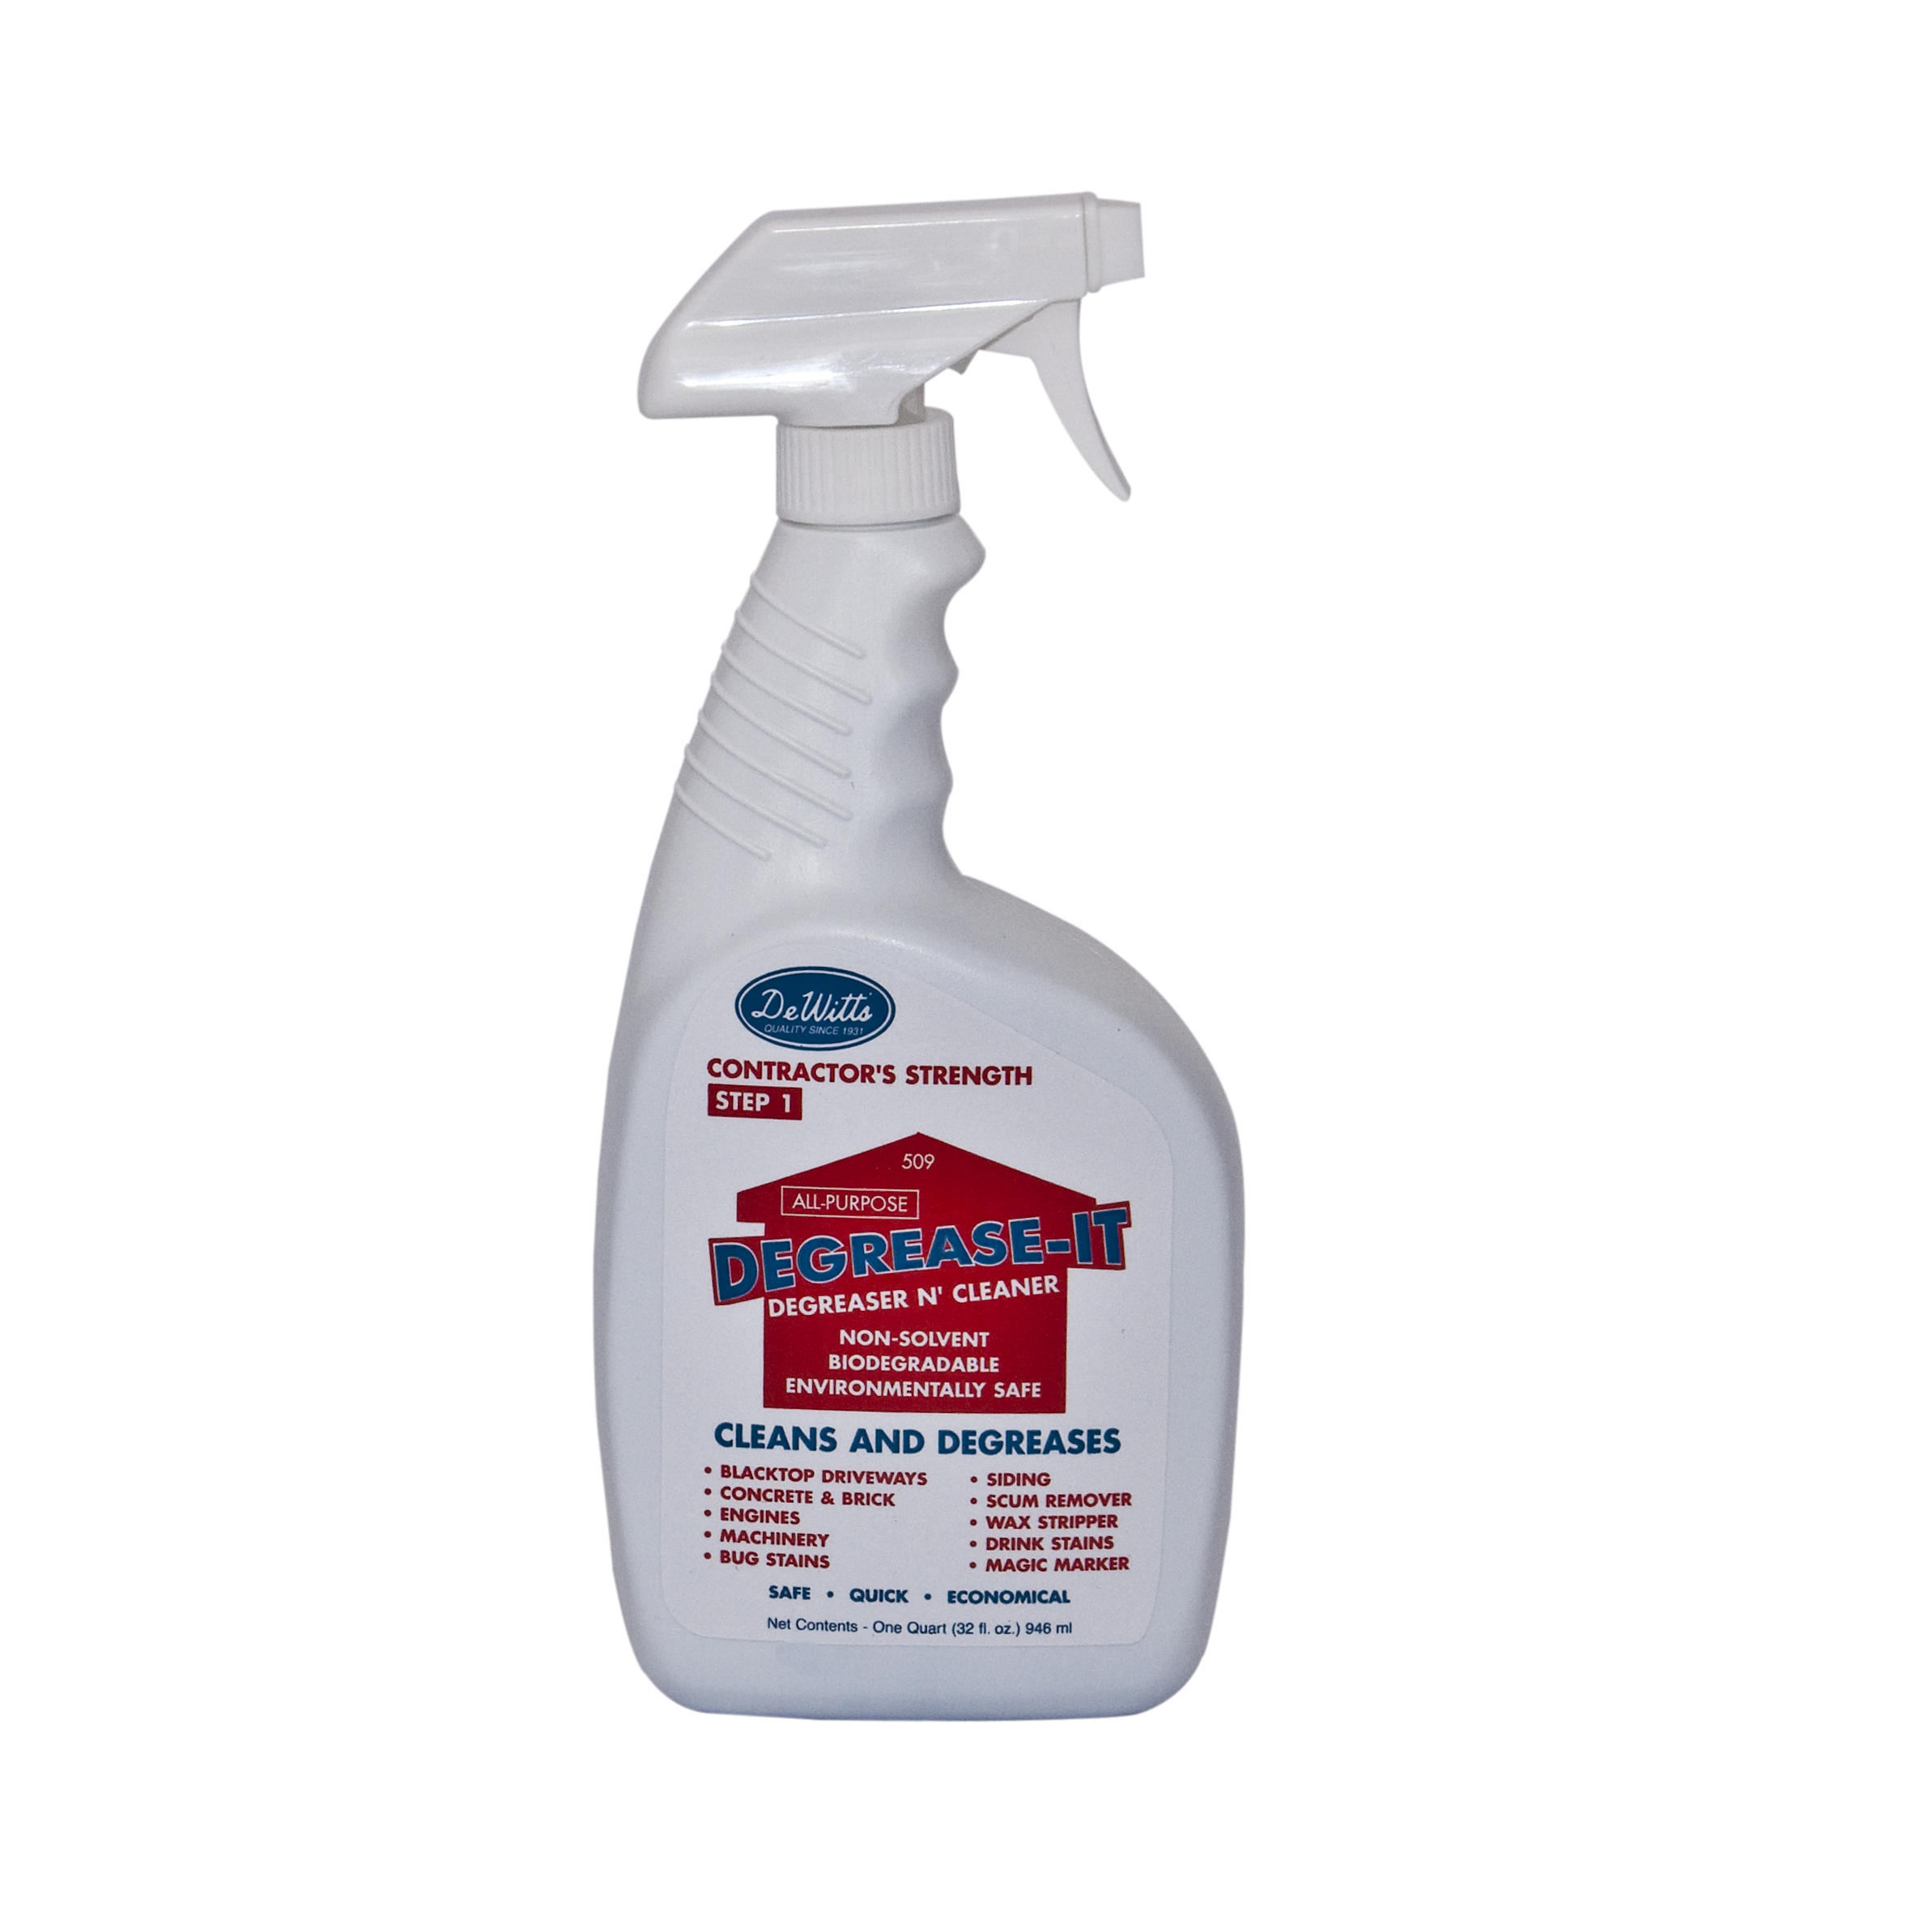 Plant Based Degreaser Cleaner – Nuvera